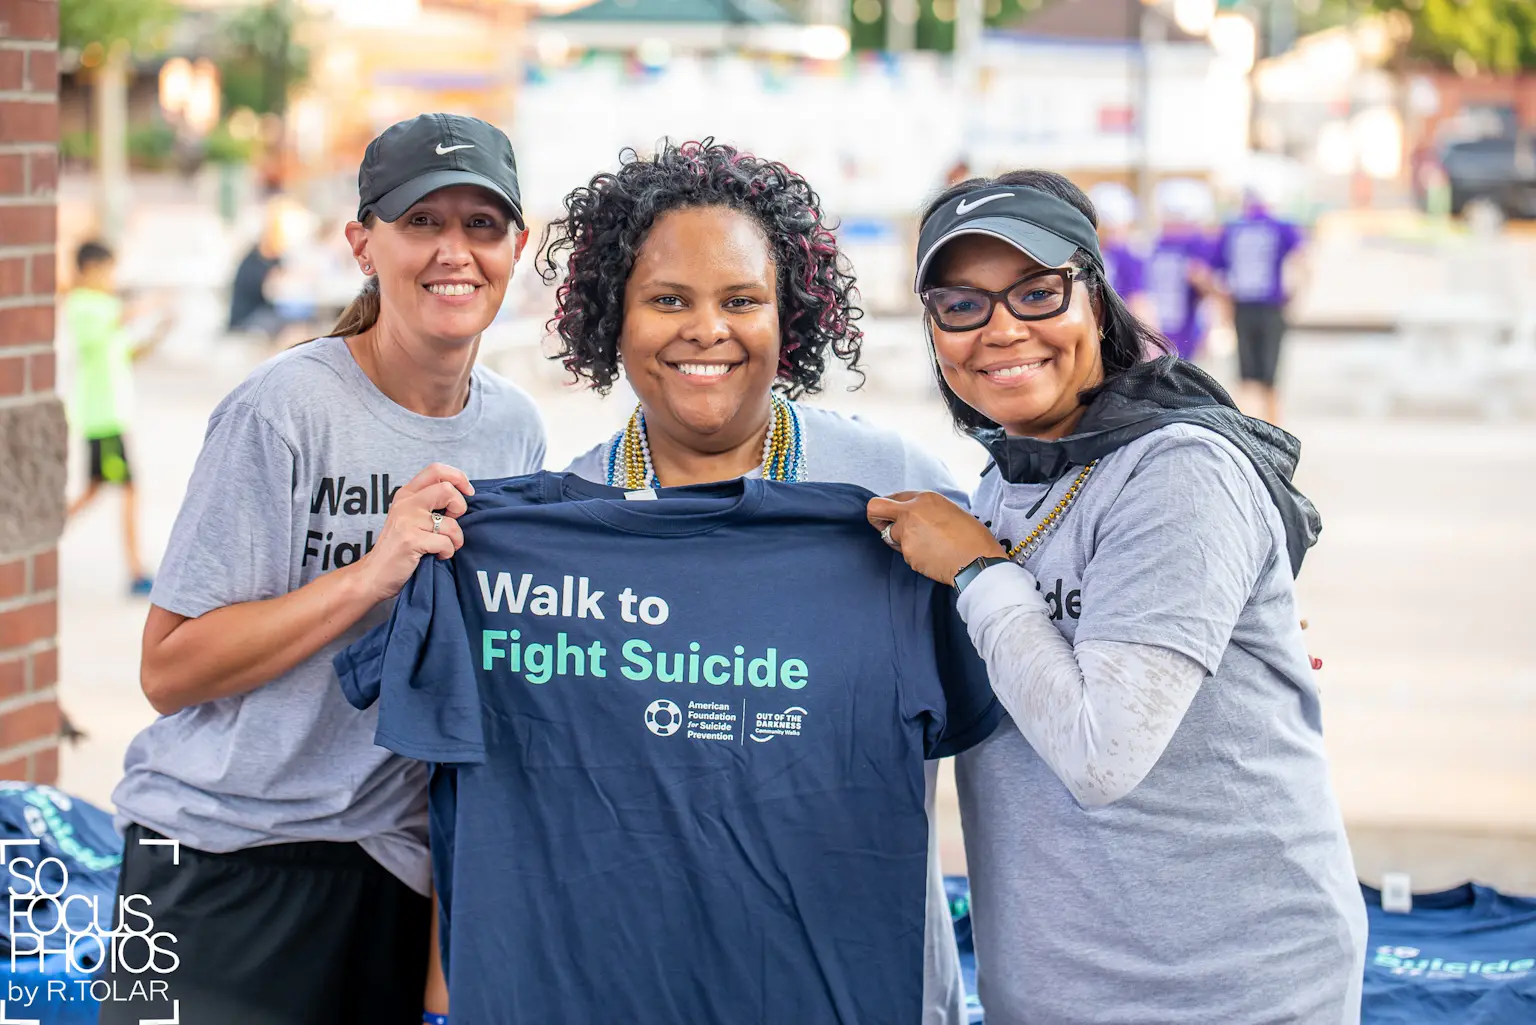 Volunteers holding Walk to Fight Suicide shirt